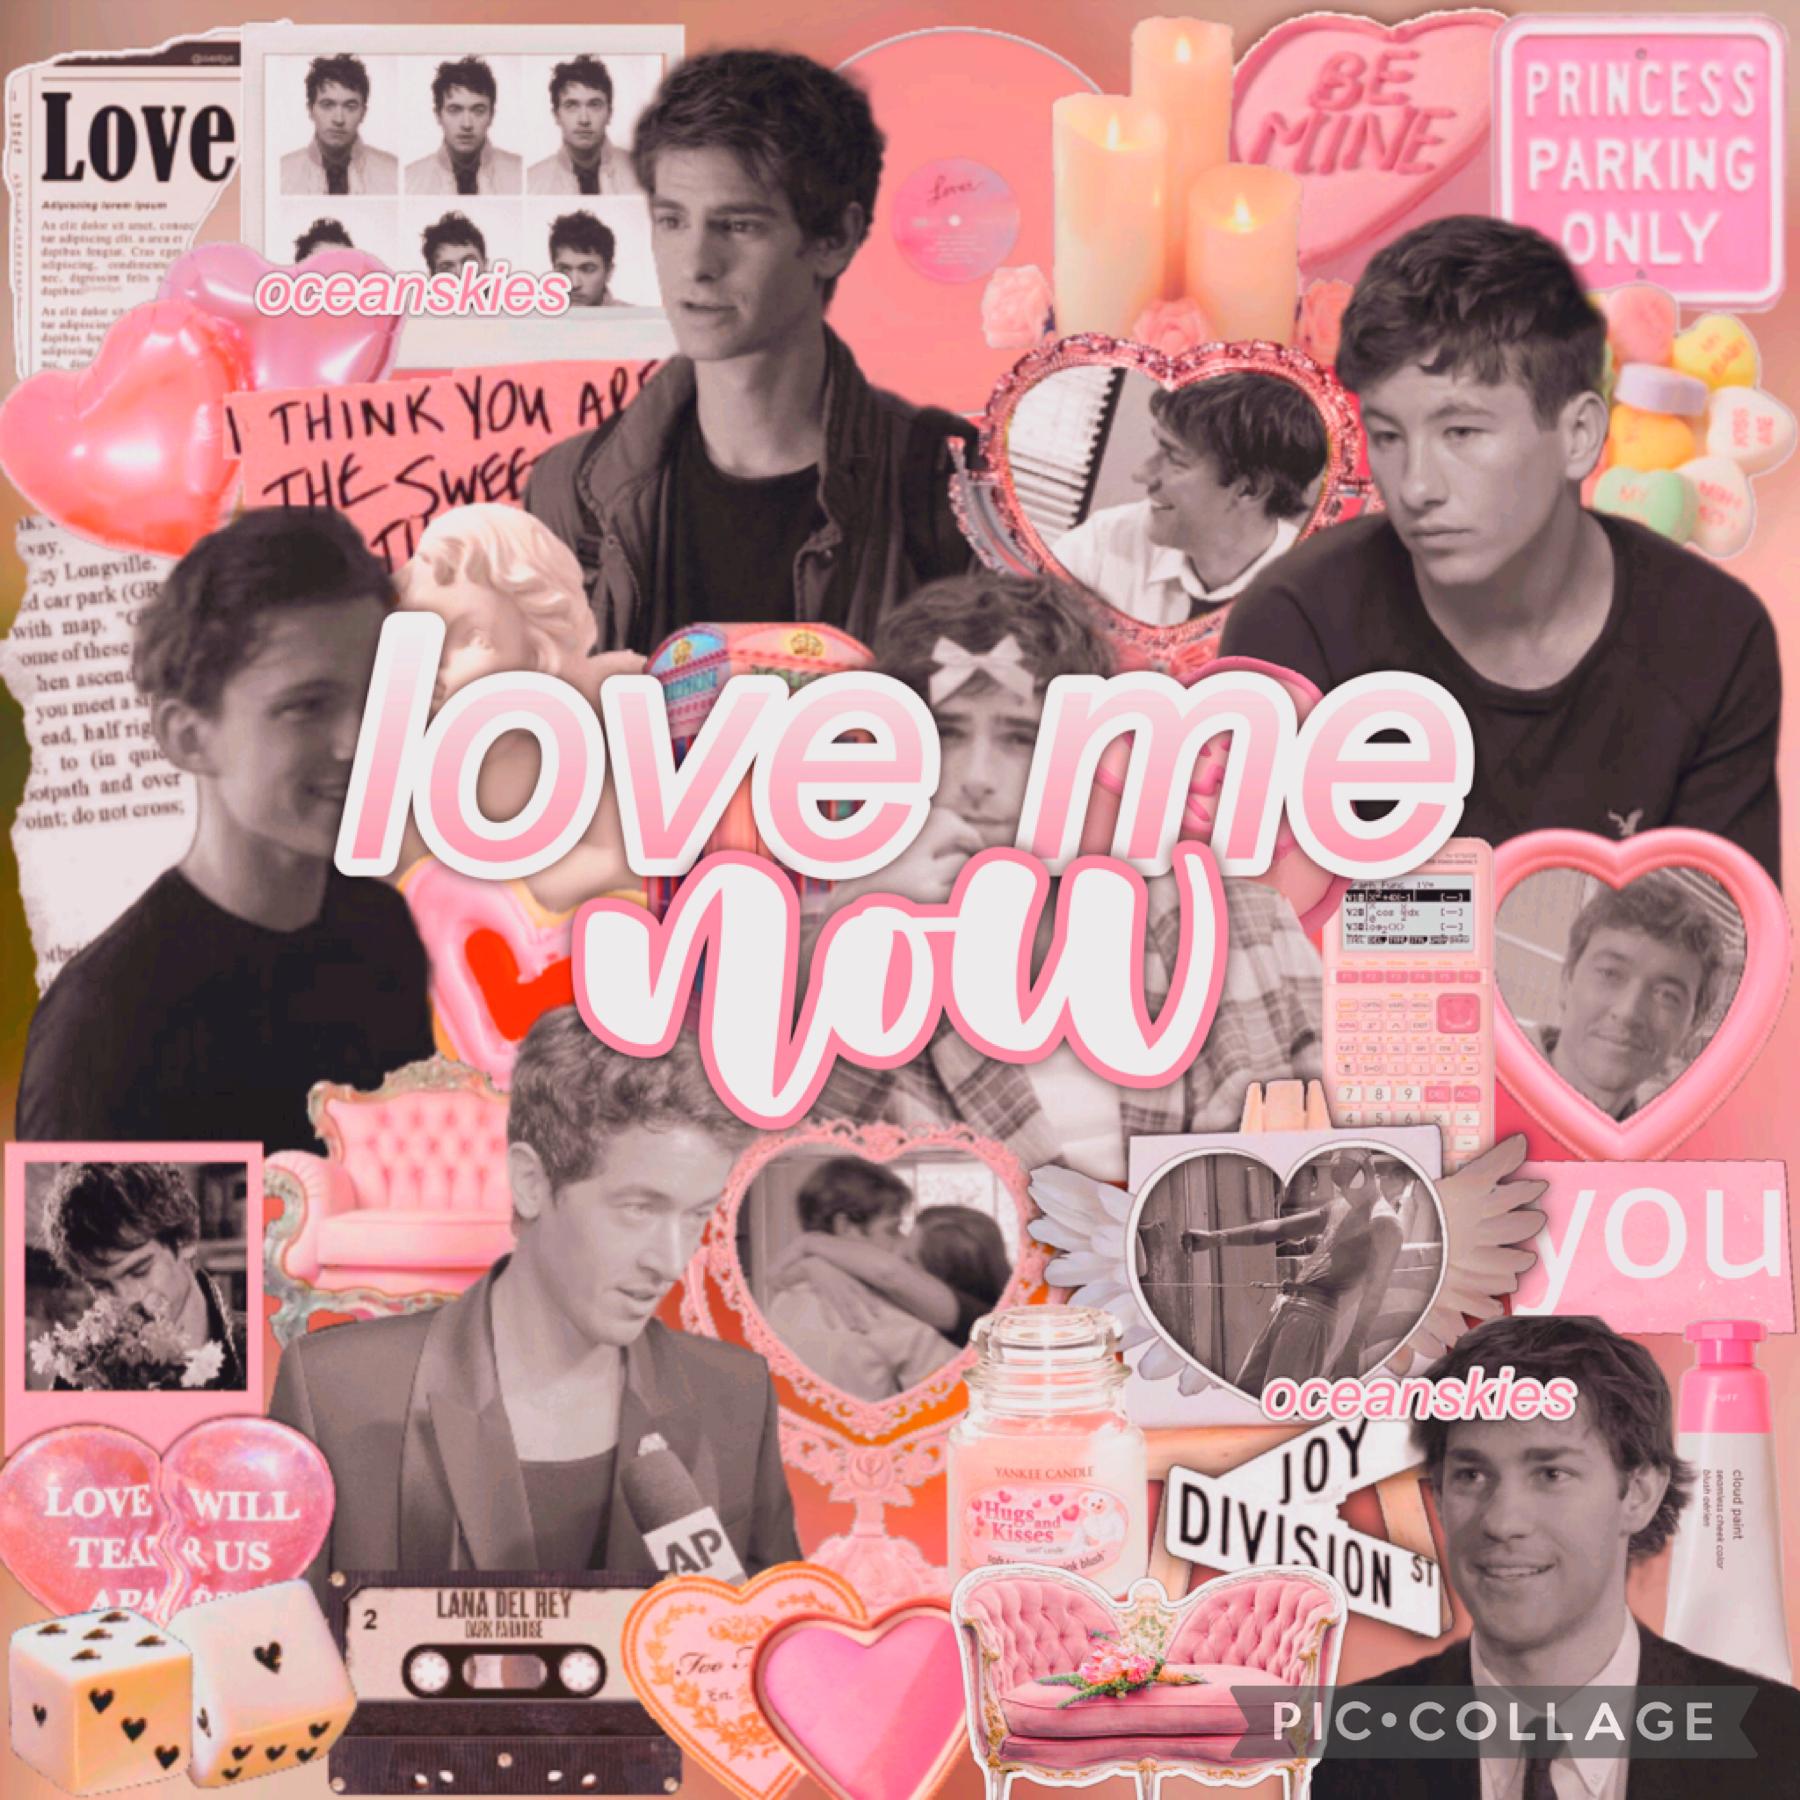 happy february! 💘
here’s an edit of my favorite men because it’s valentines month (and my birthday month!) 💌💌💌